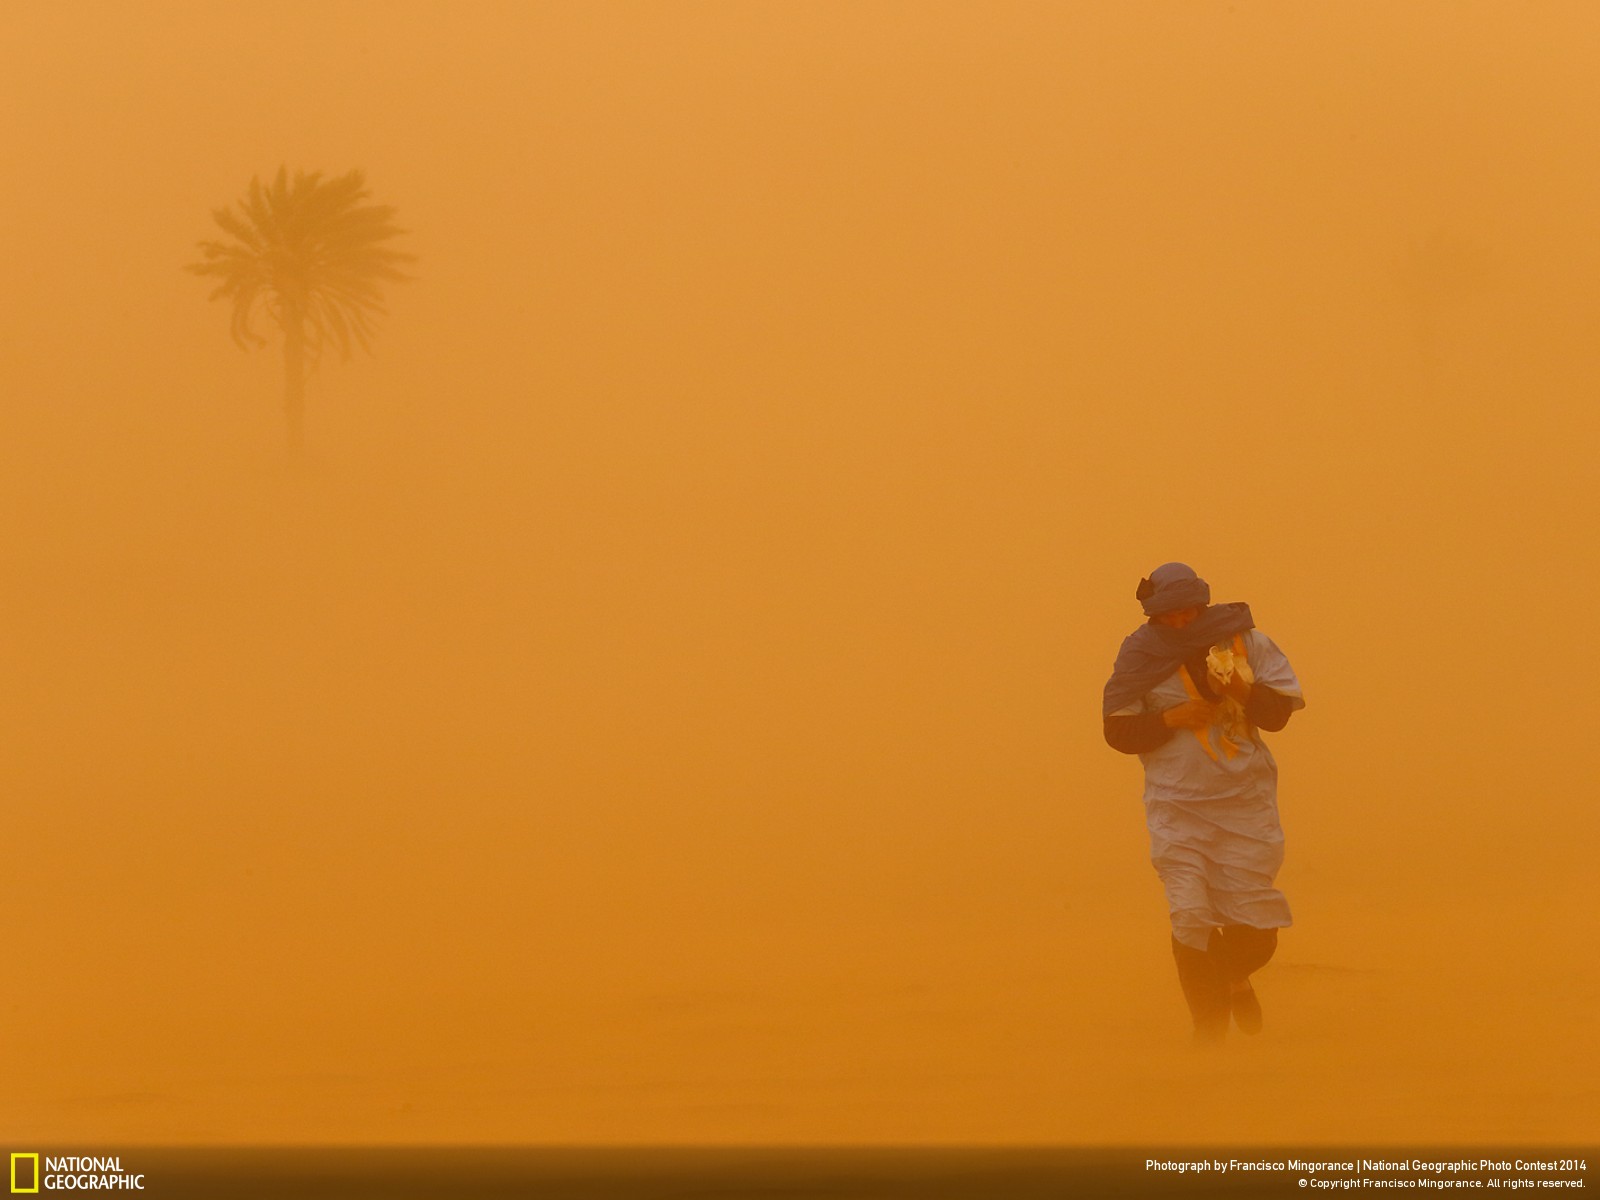 The Best Pictures From National Geographic’s Photo Contest 2014